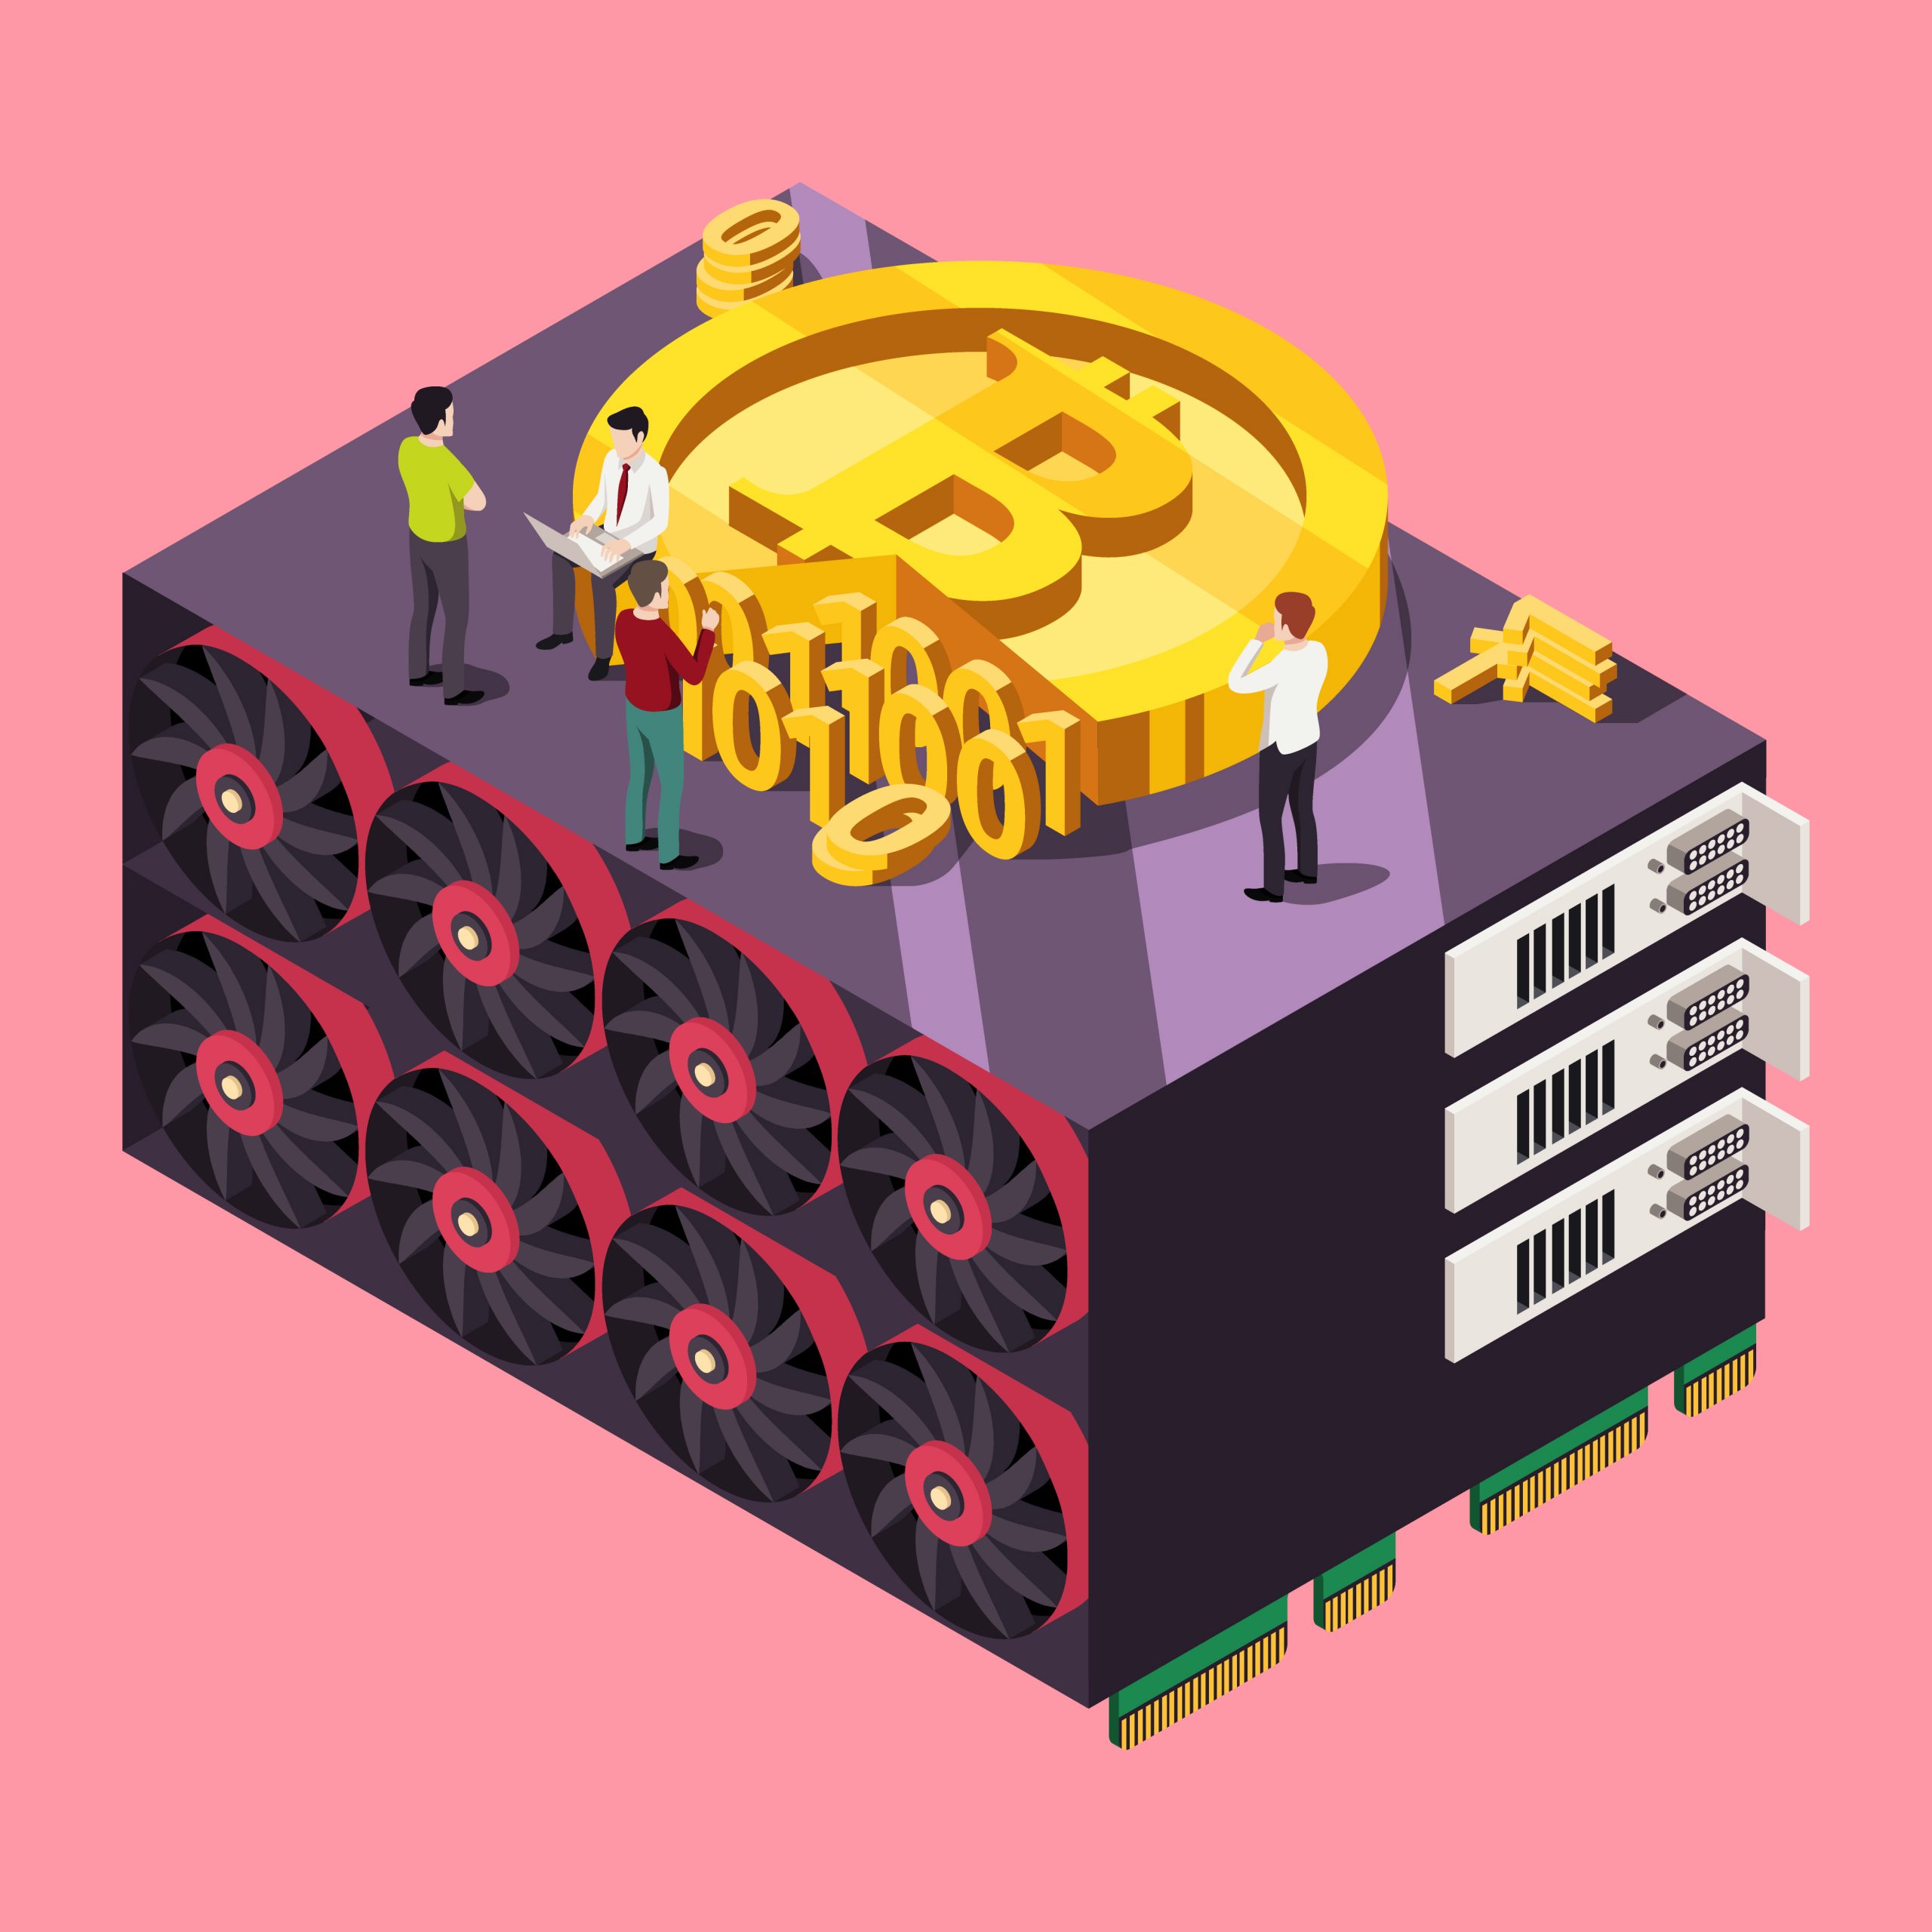 How do you mining cryptocurrency with GPU?